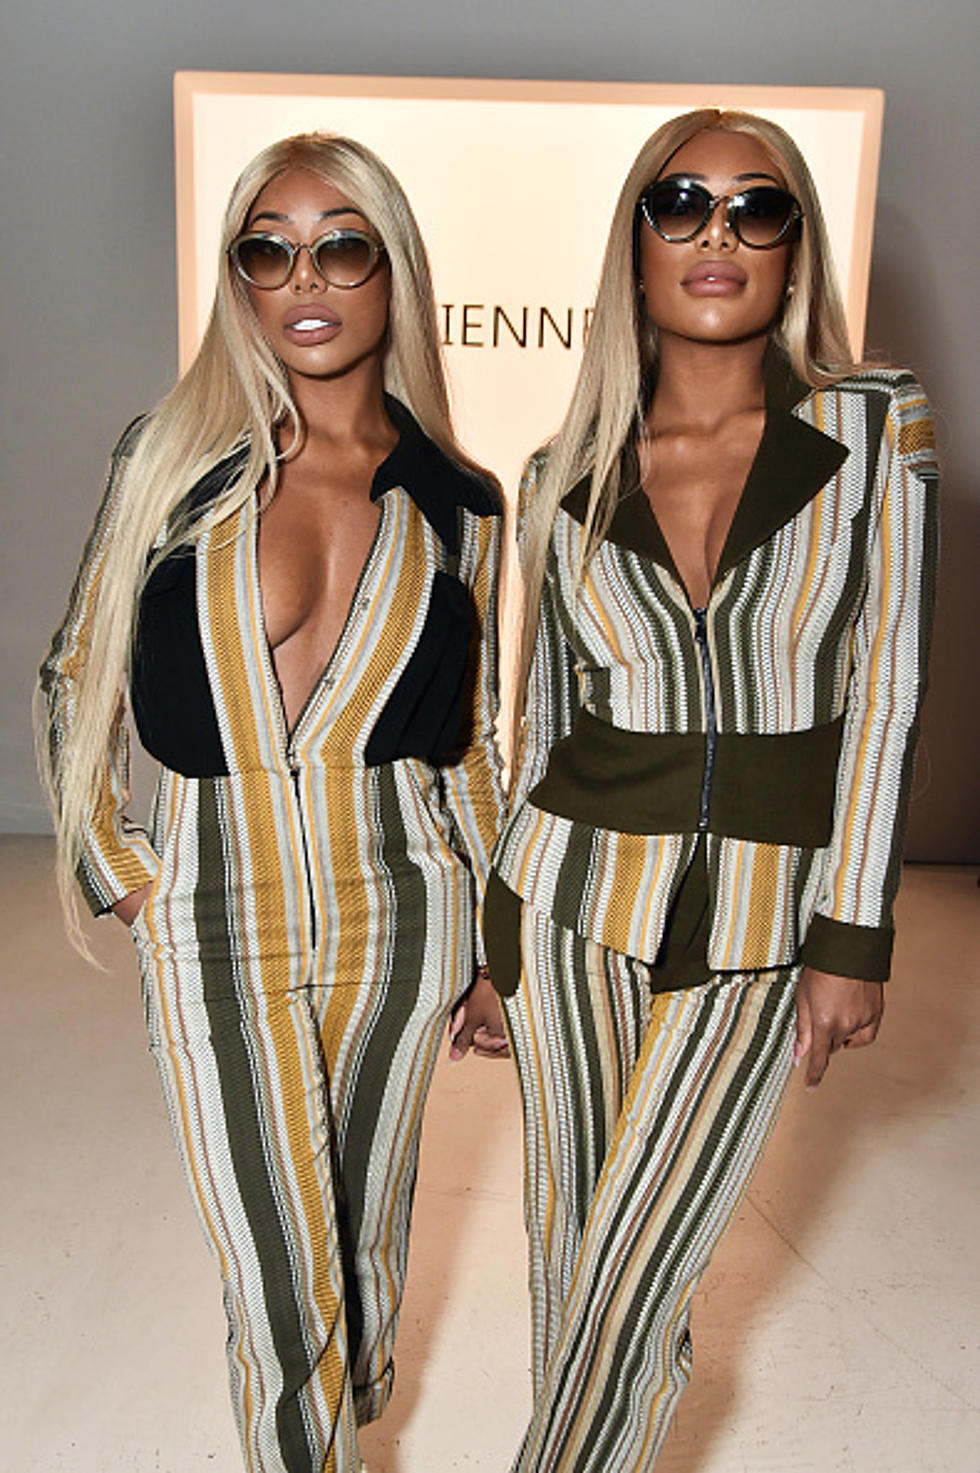 Shannade Clermont Has Been Sentenced To 1 Year In Prison